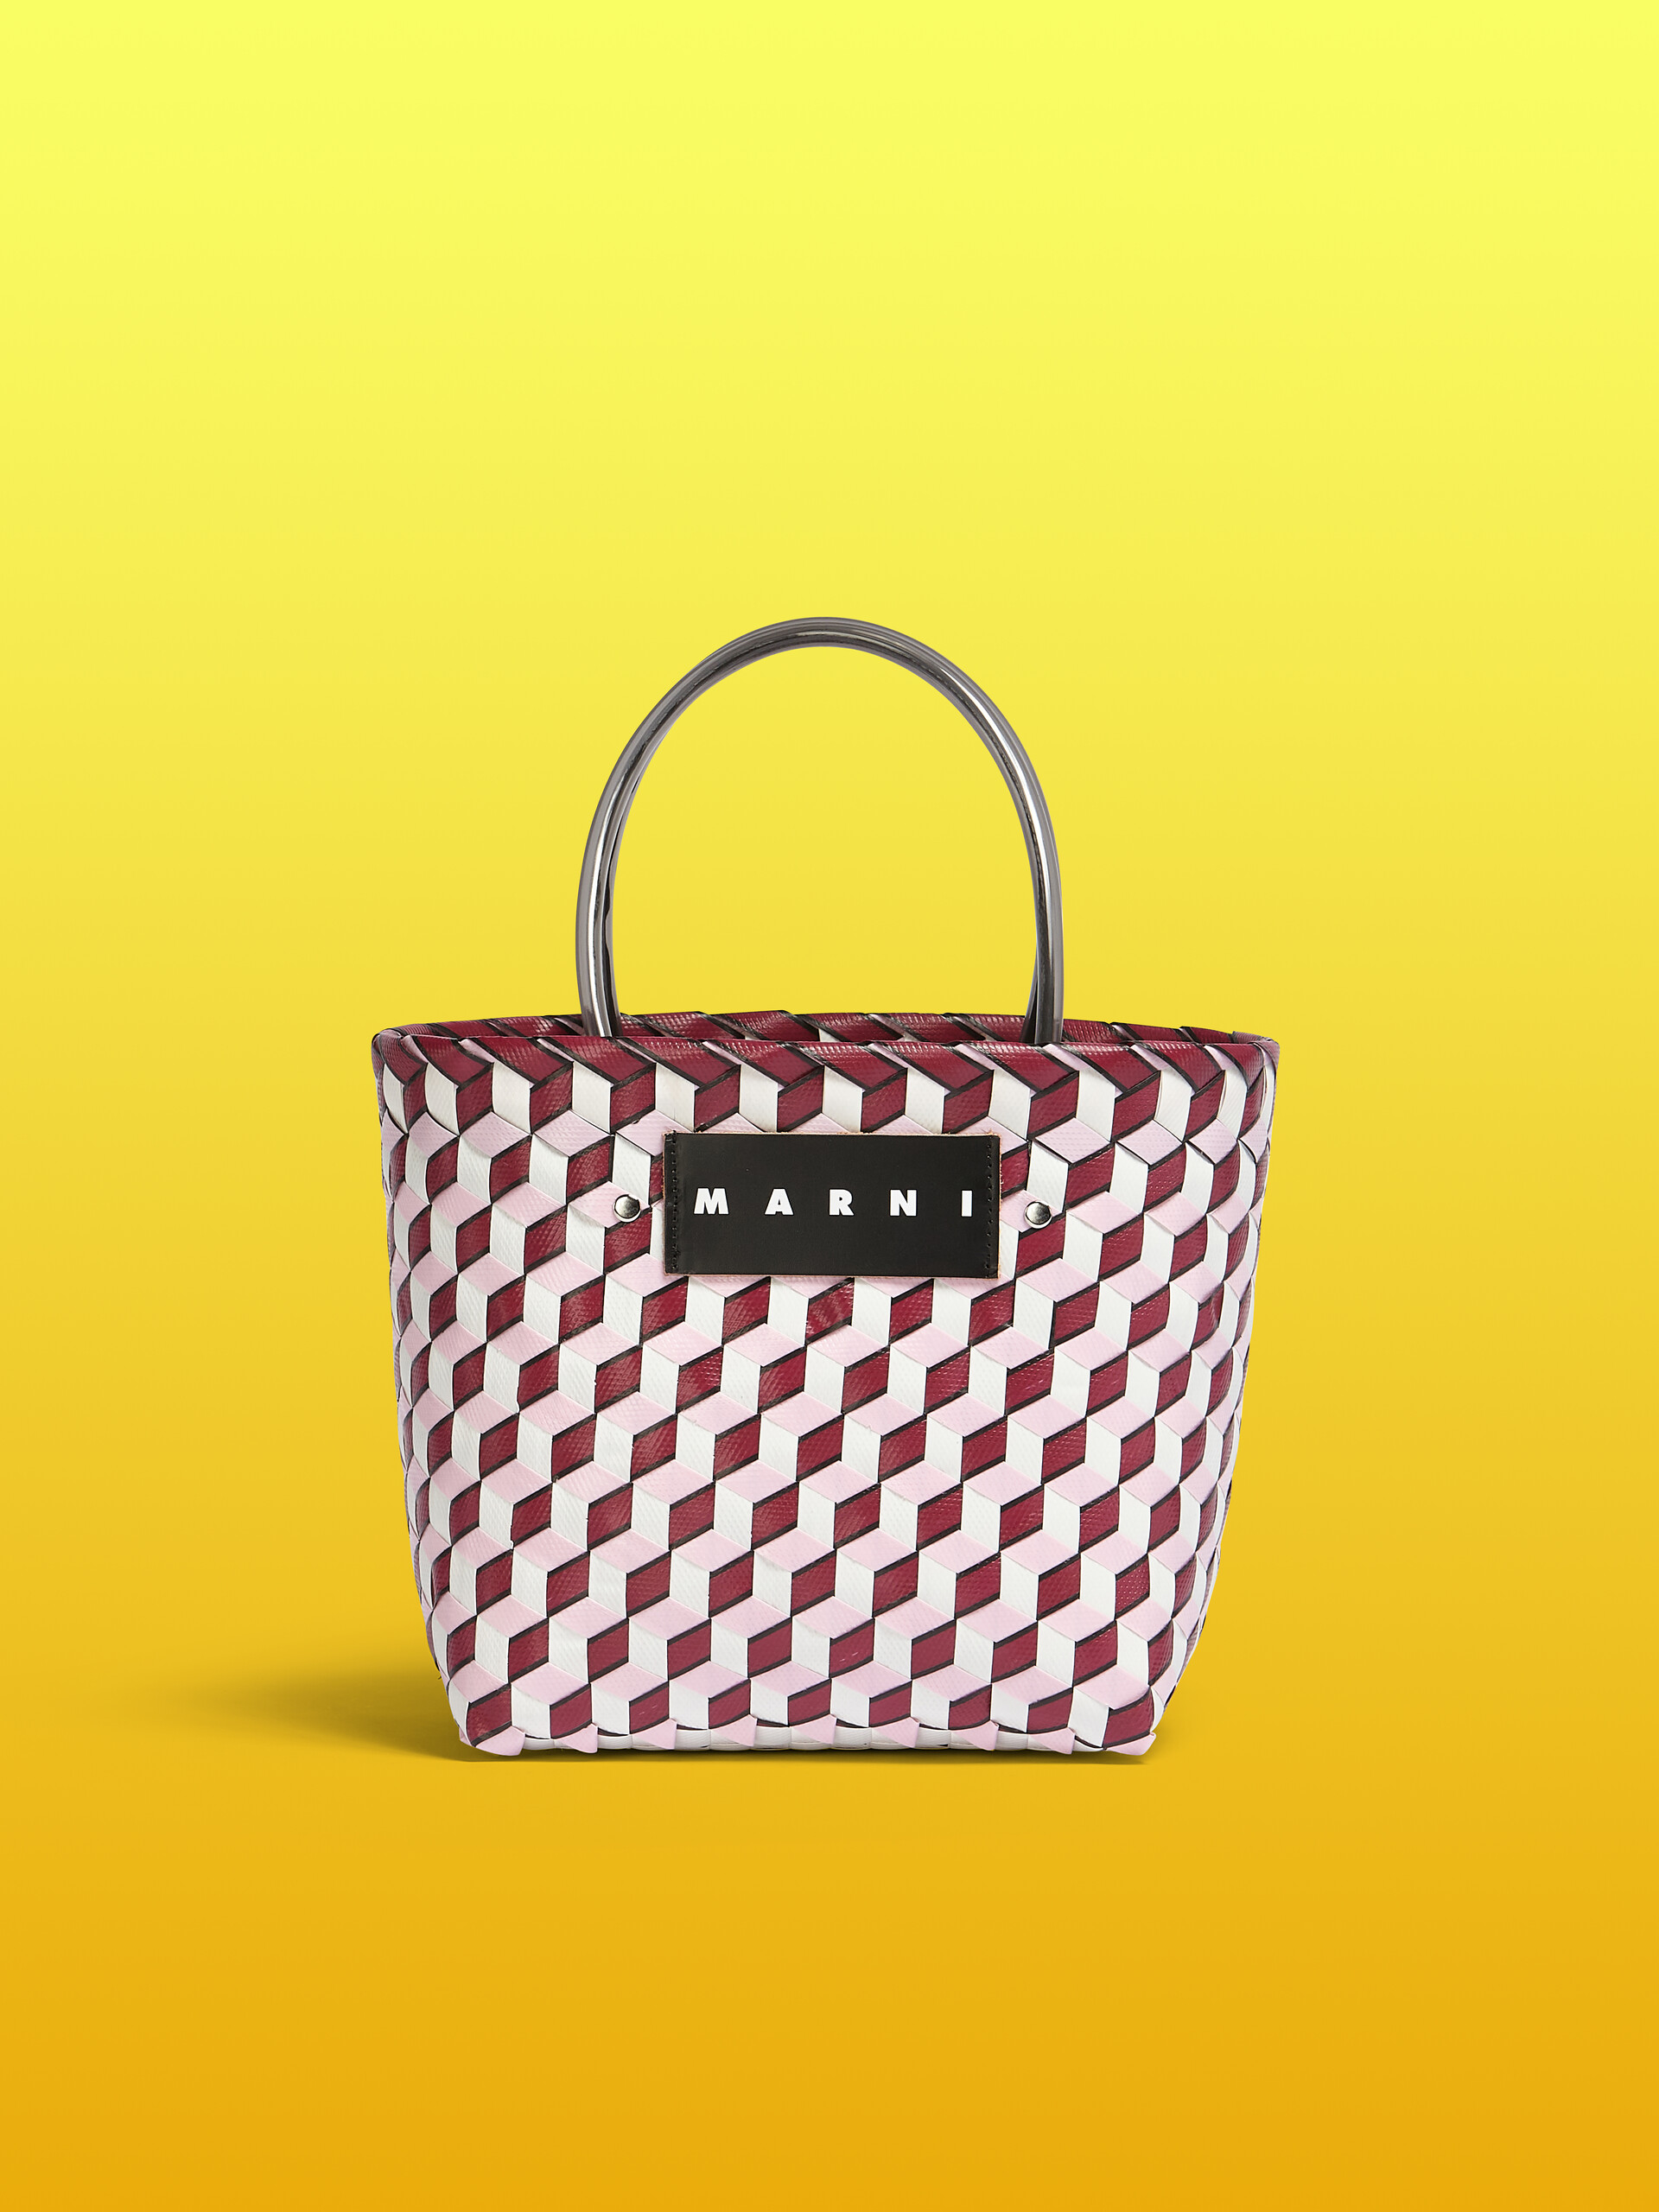 MARNI MARKET 3D BAG in burgundy cube woven material - Shopping Bags - Image 1